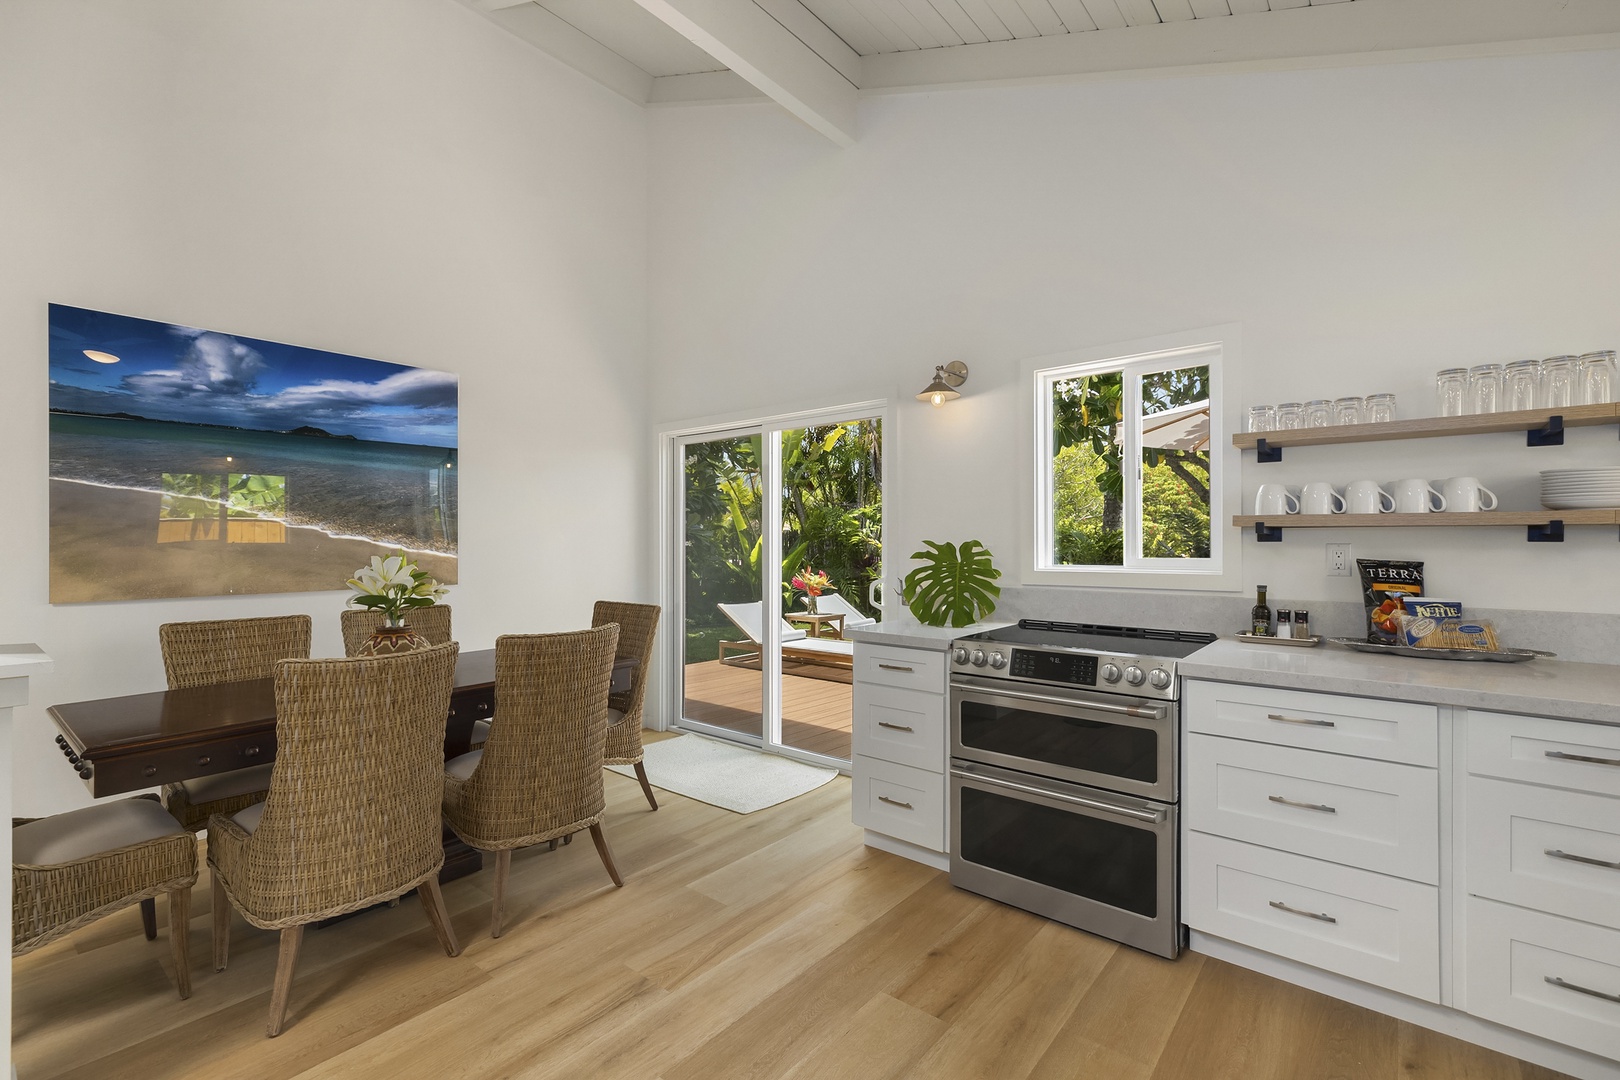 Kailua Vacation Rentals, Ranch Beach House - Dining Room with natural lighting and opens to main lanai and garden area.